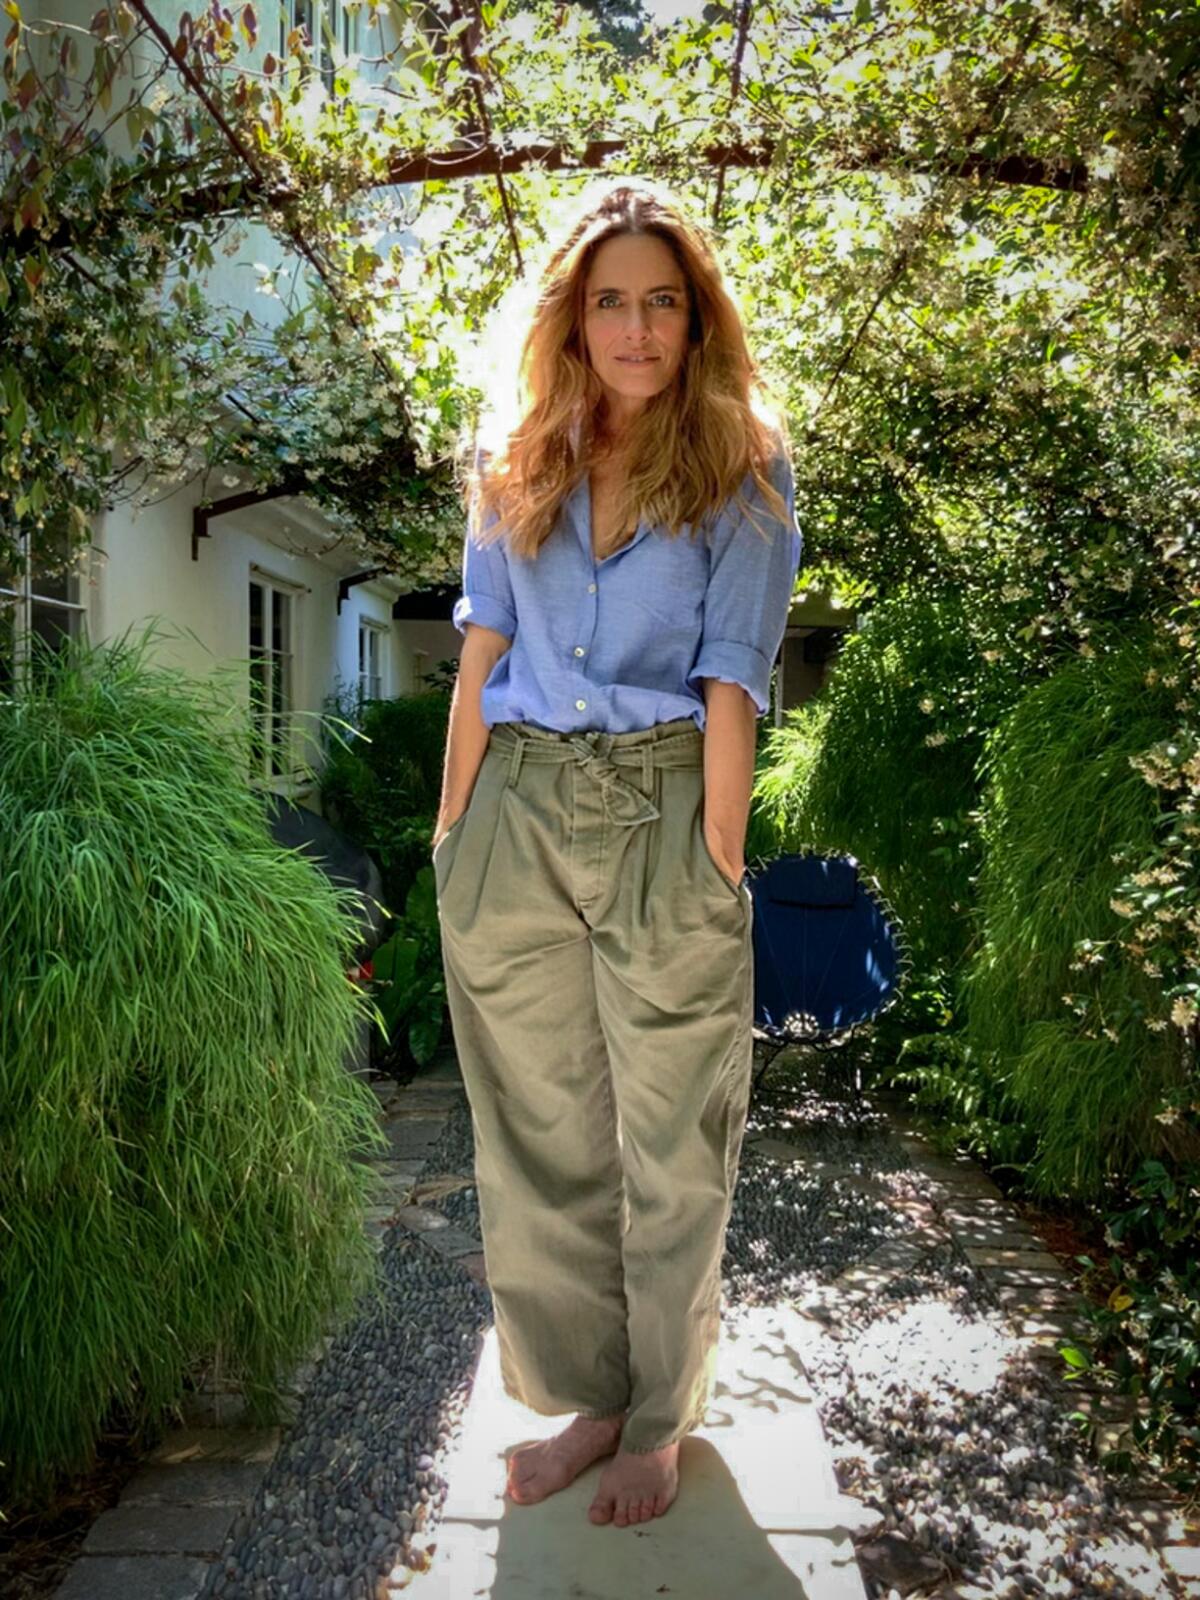 Amanda Peet, who stars in "Dirty John: The Betty Broderick Story," photographed via iPad at her Los Angeles home.